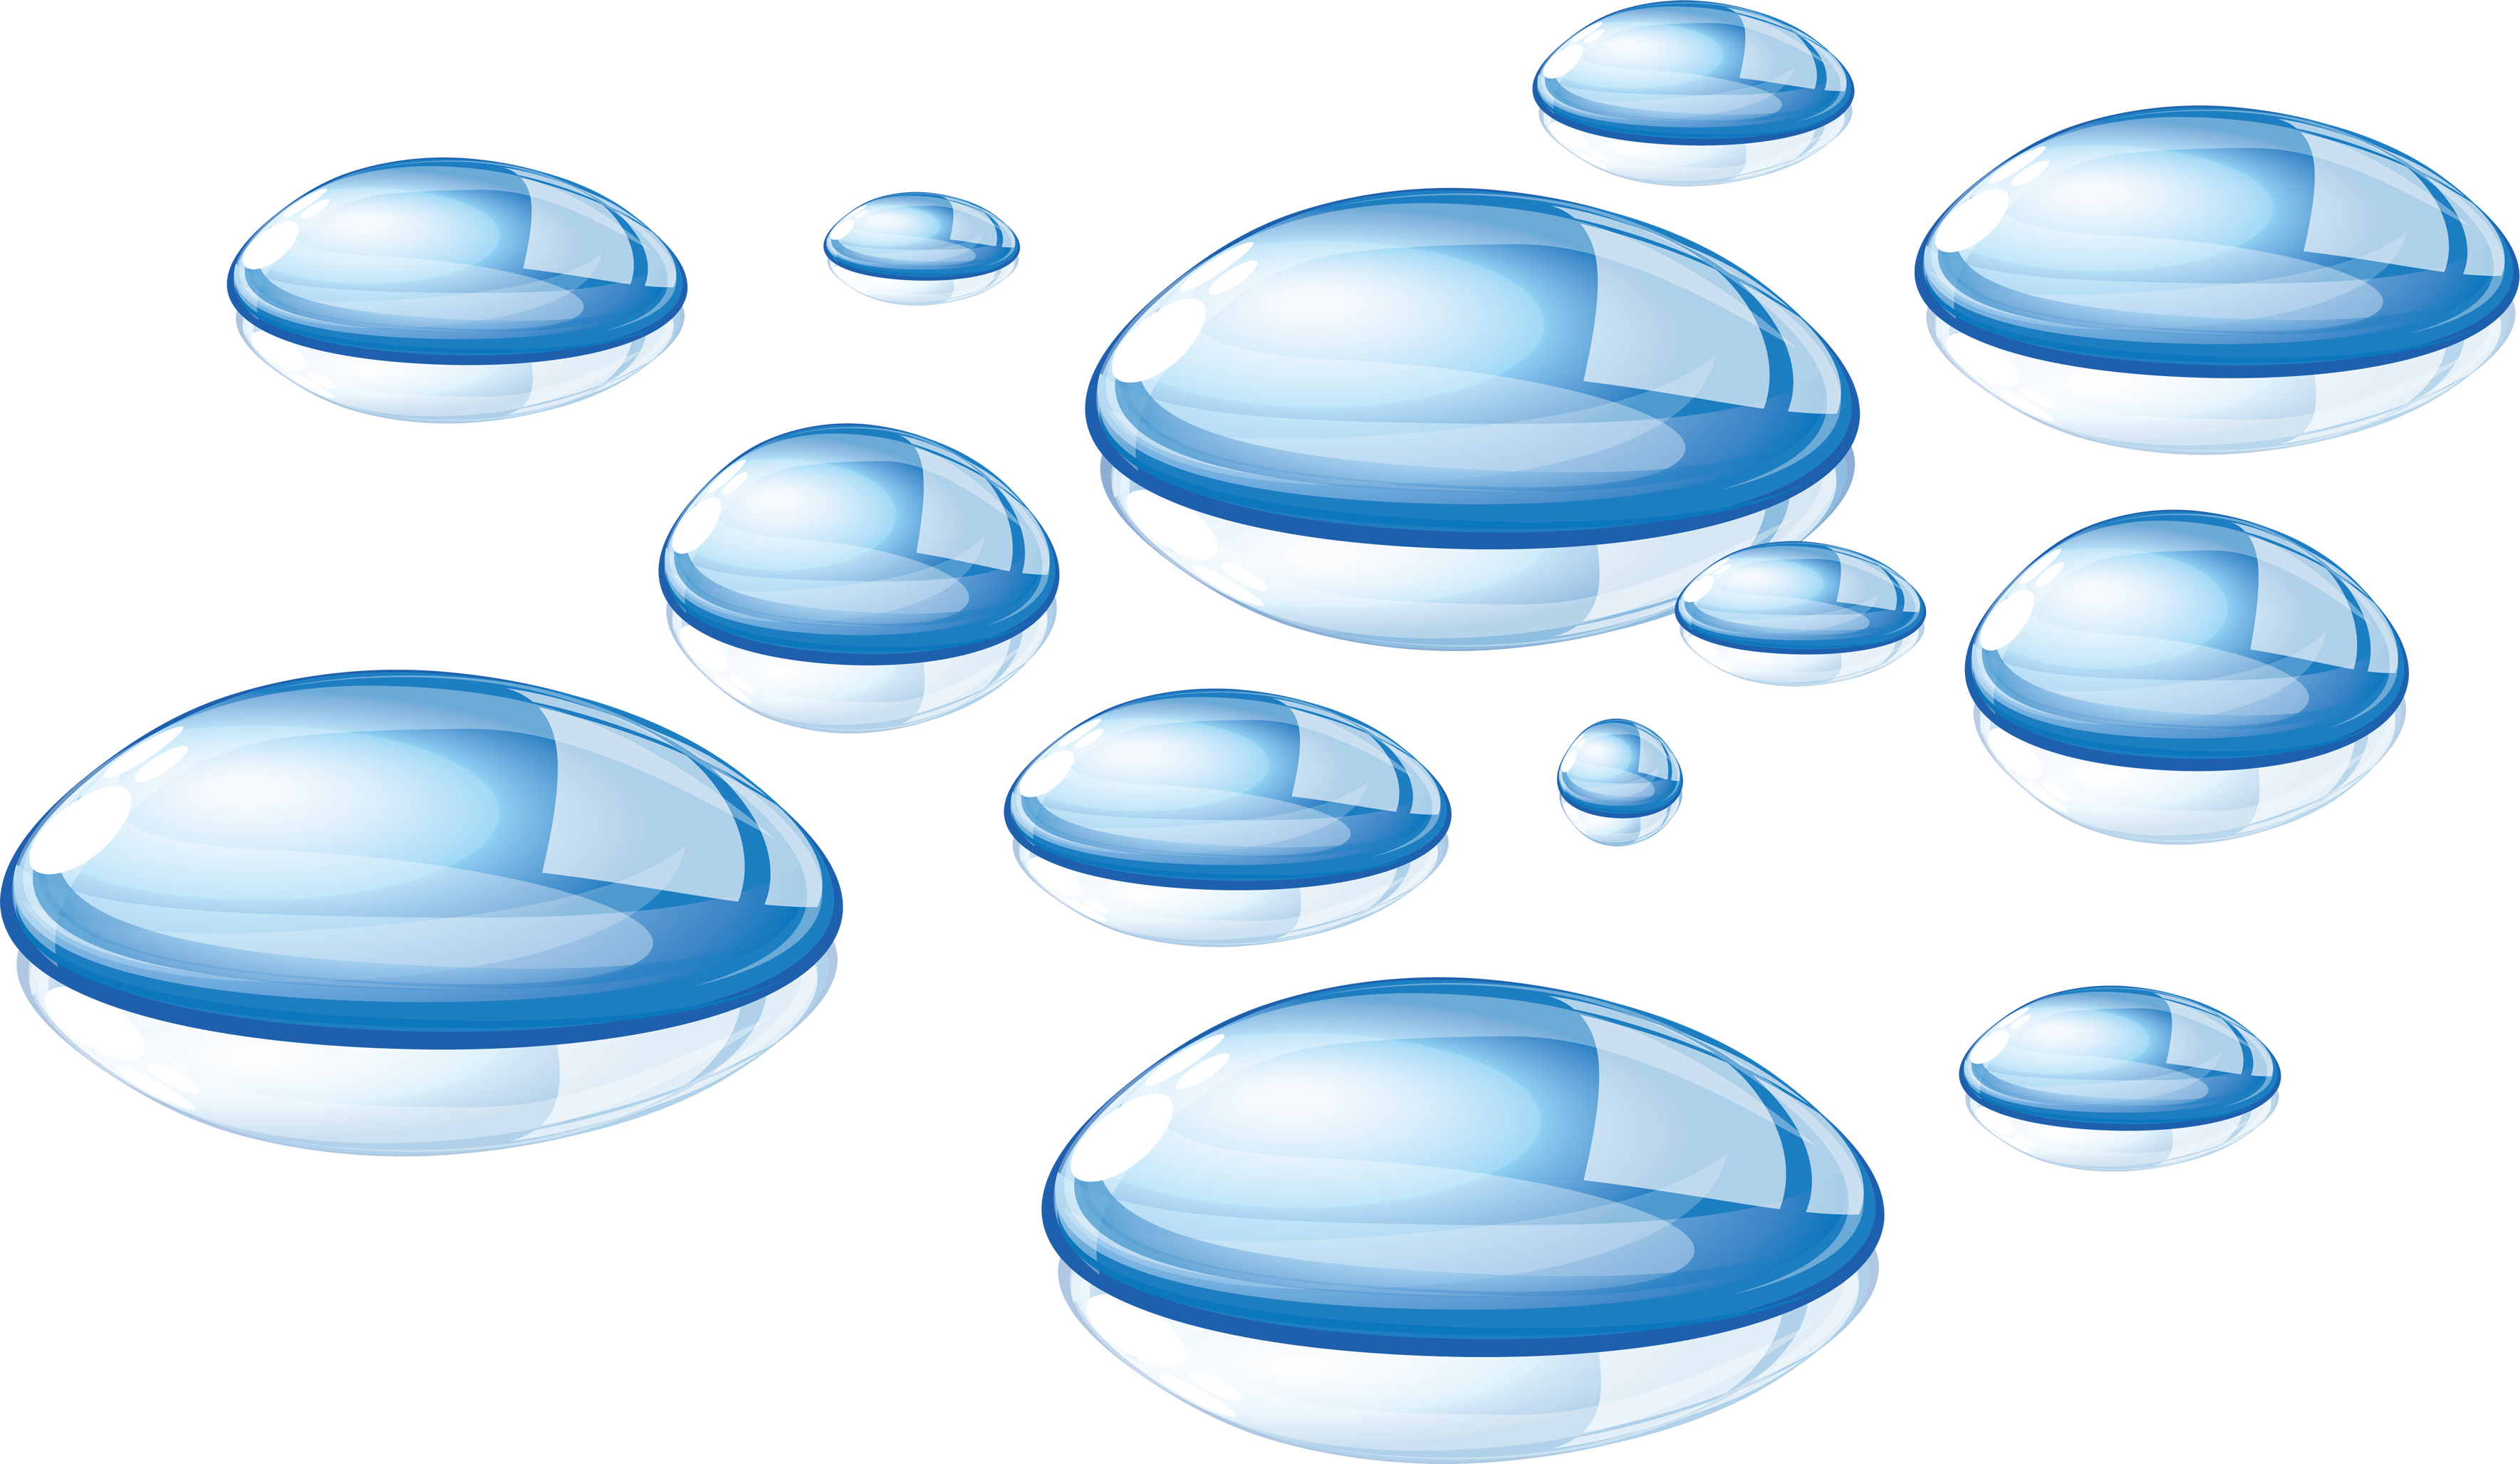 Google images collection png. Background clipart water